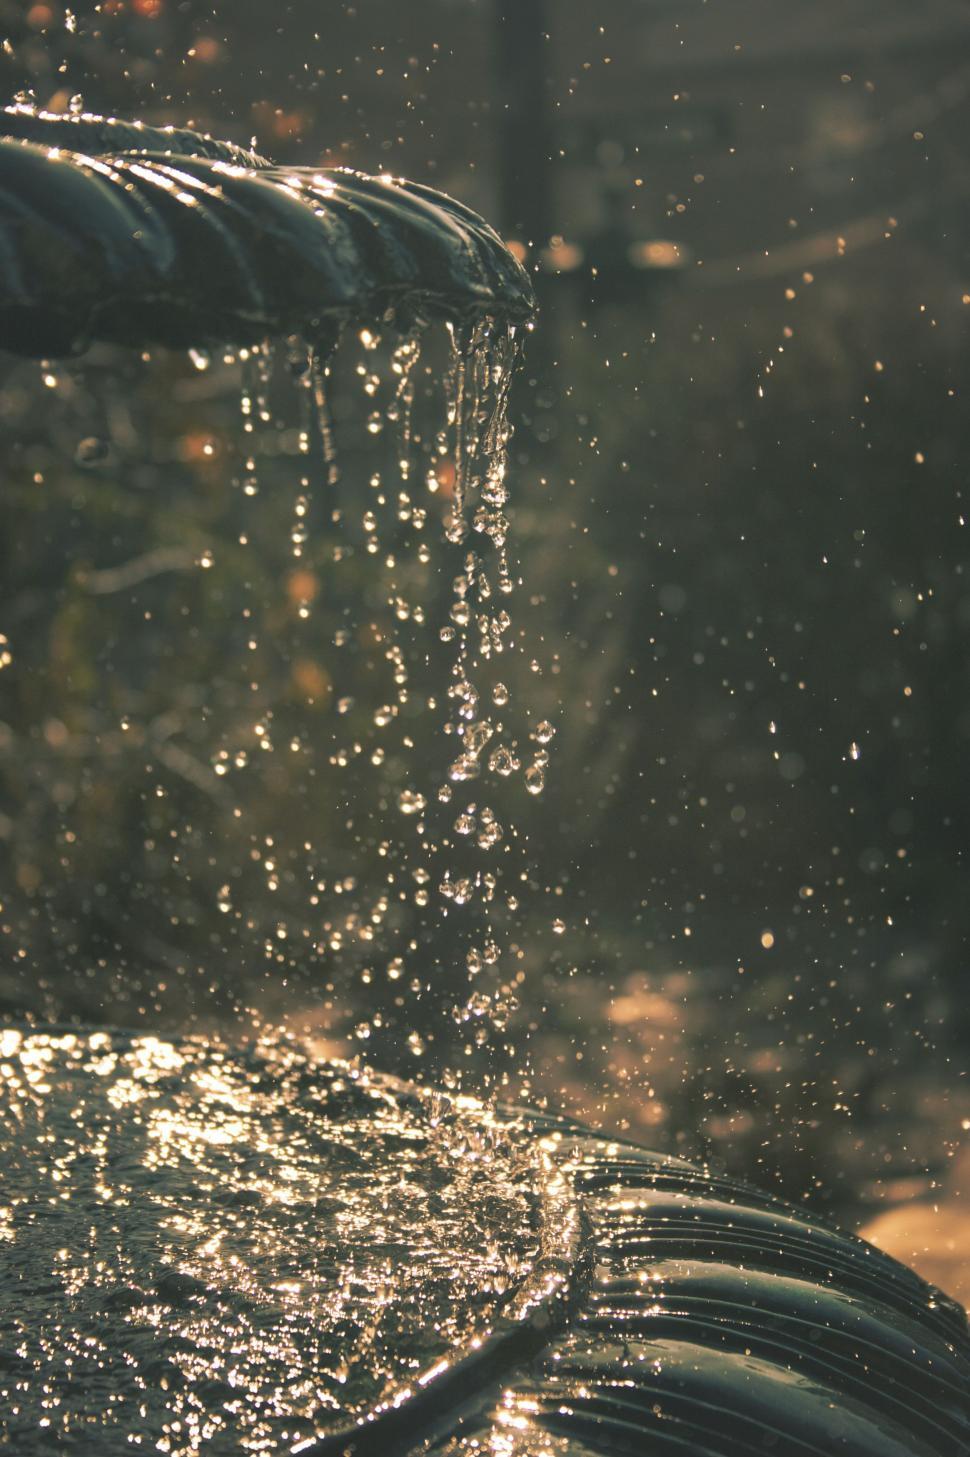 Free Image of A Close Up of a Water Faucet With Rain Coming Off 